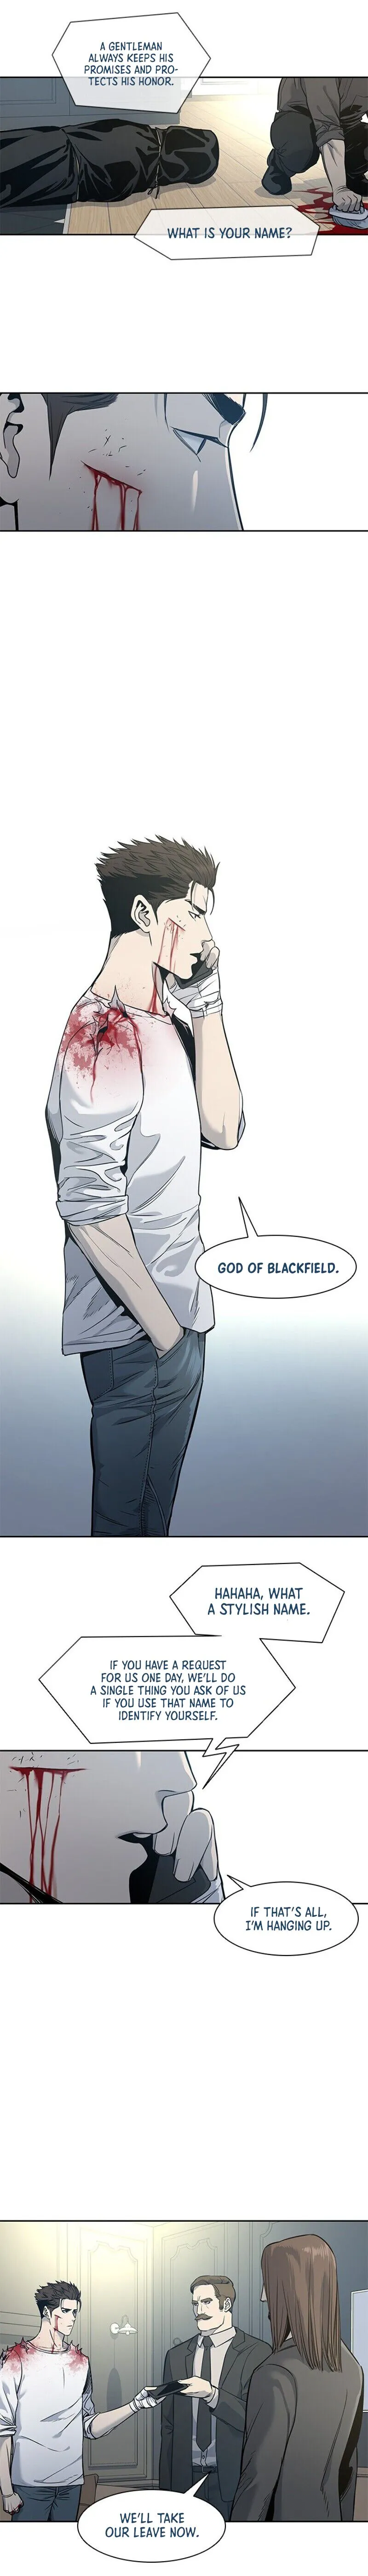 God of Blackfield Chapter 36 page 7